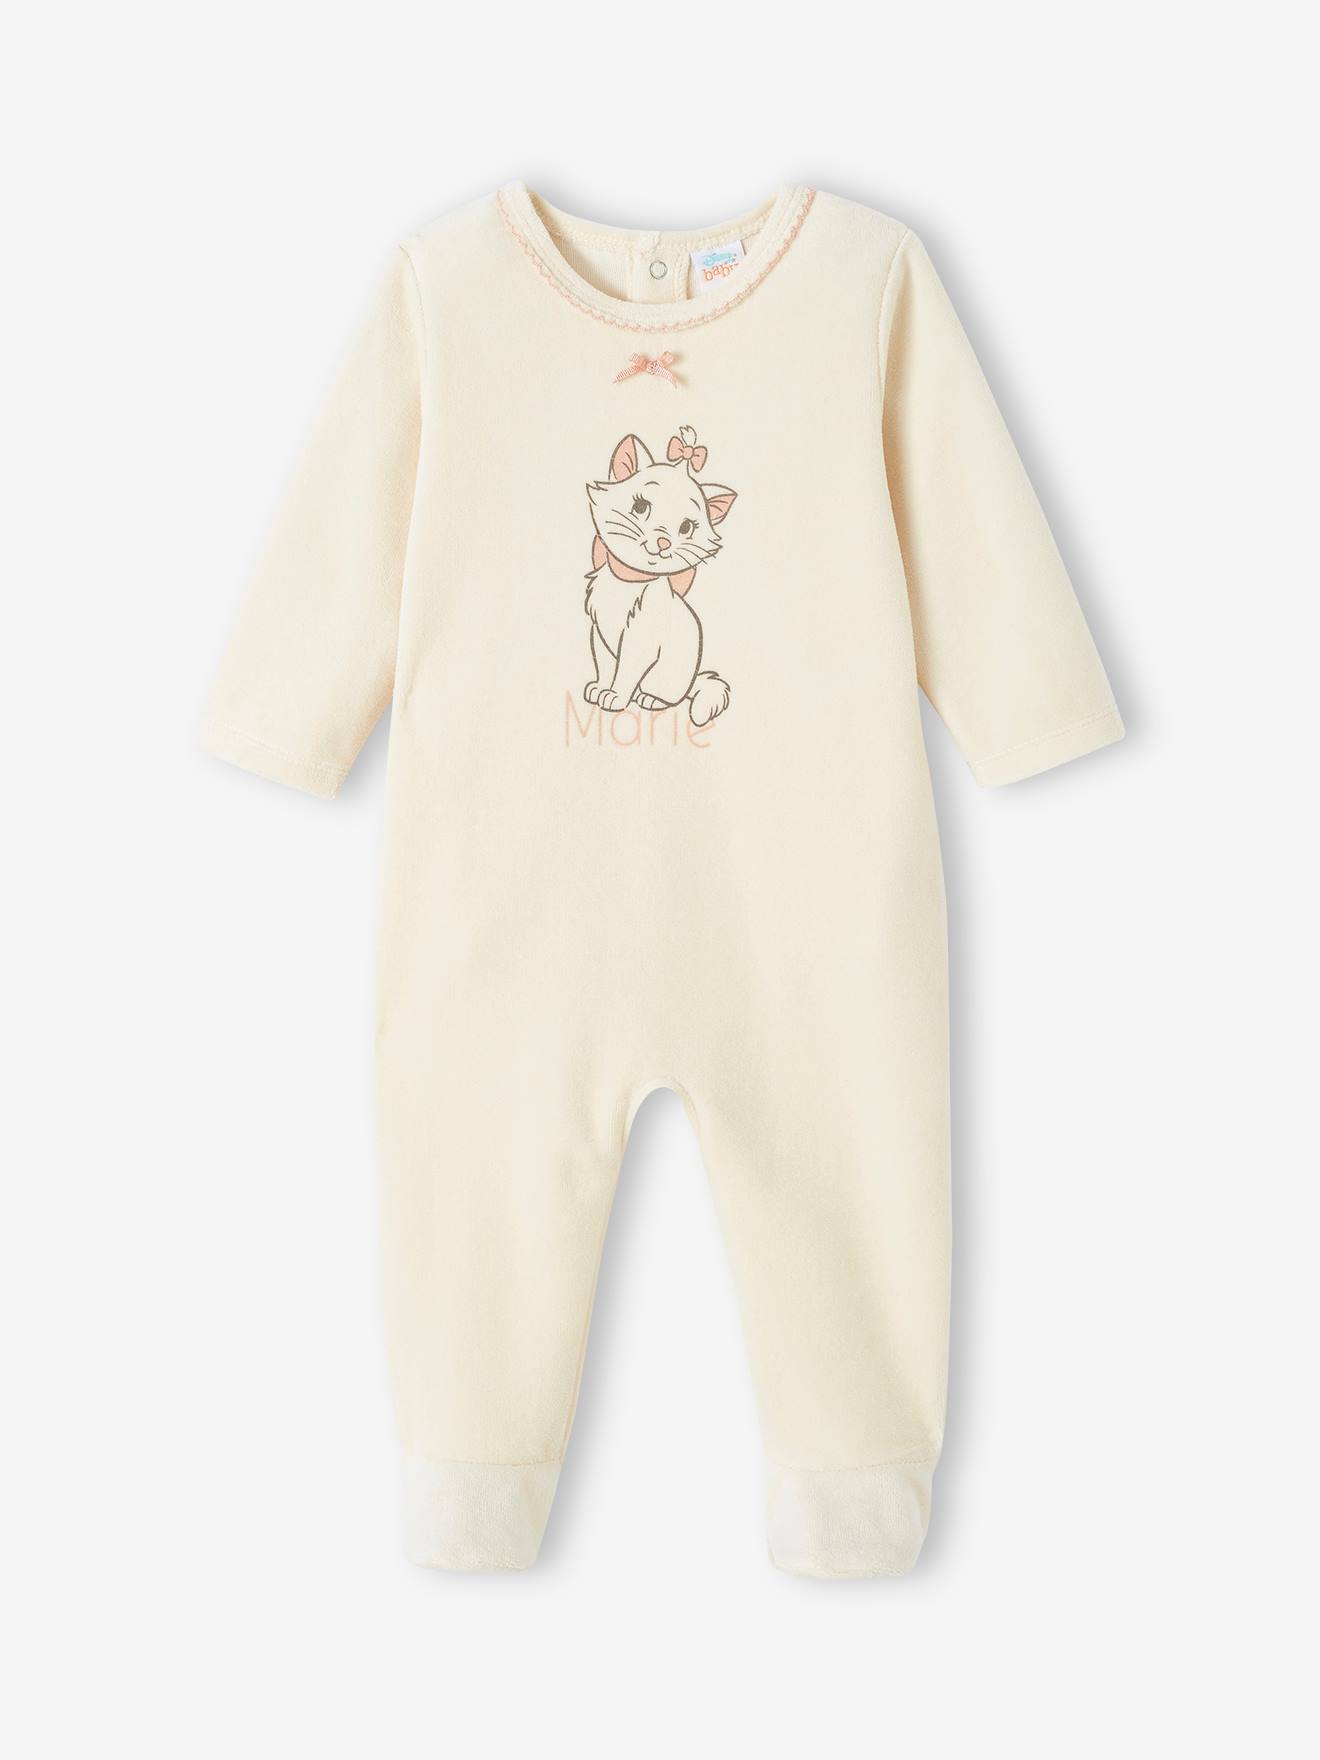 Marie The Aristocats Velour Sleepsuit for Baby Girls, by Disney(r) vanilla